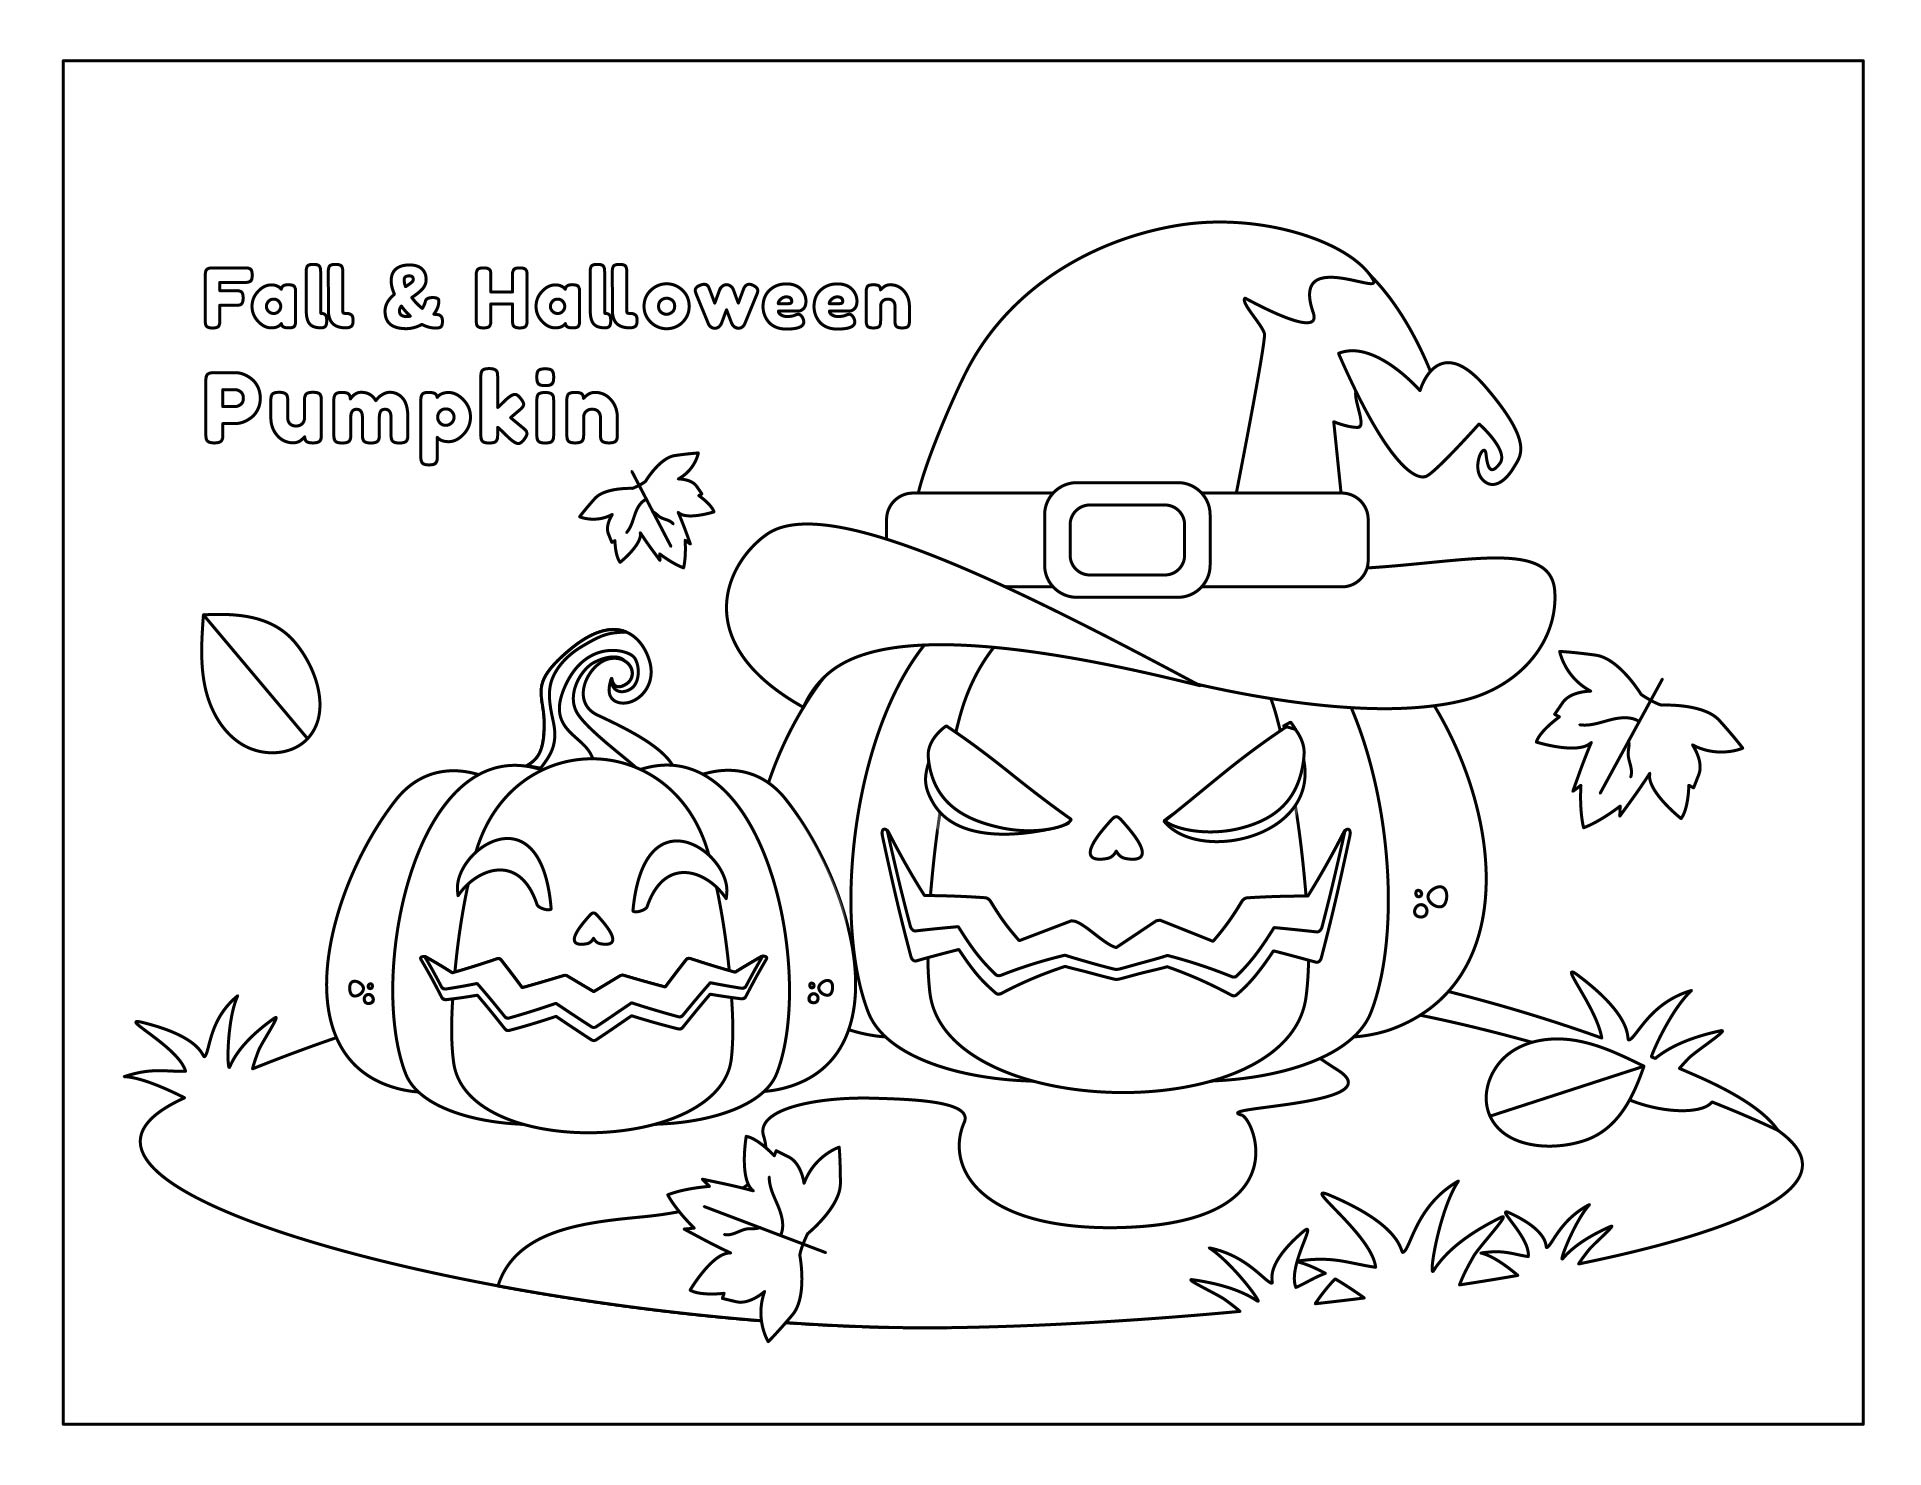 Printable Fall & Halloween Pumpkin Coloring Pages